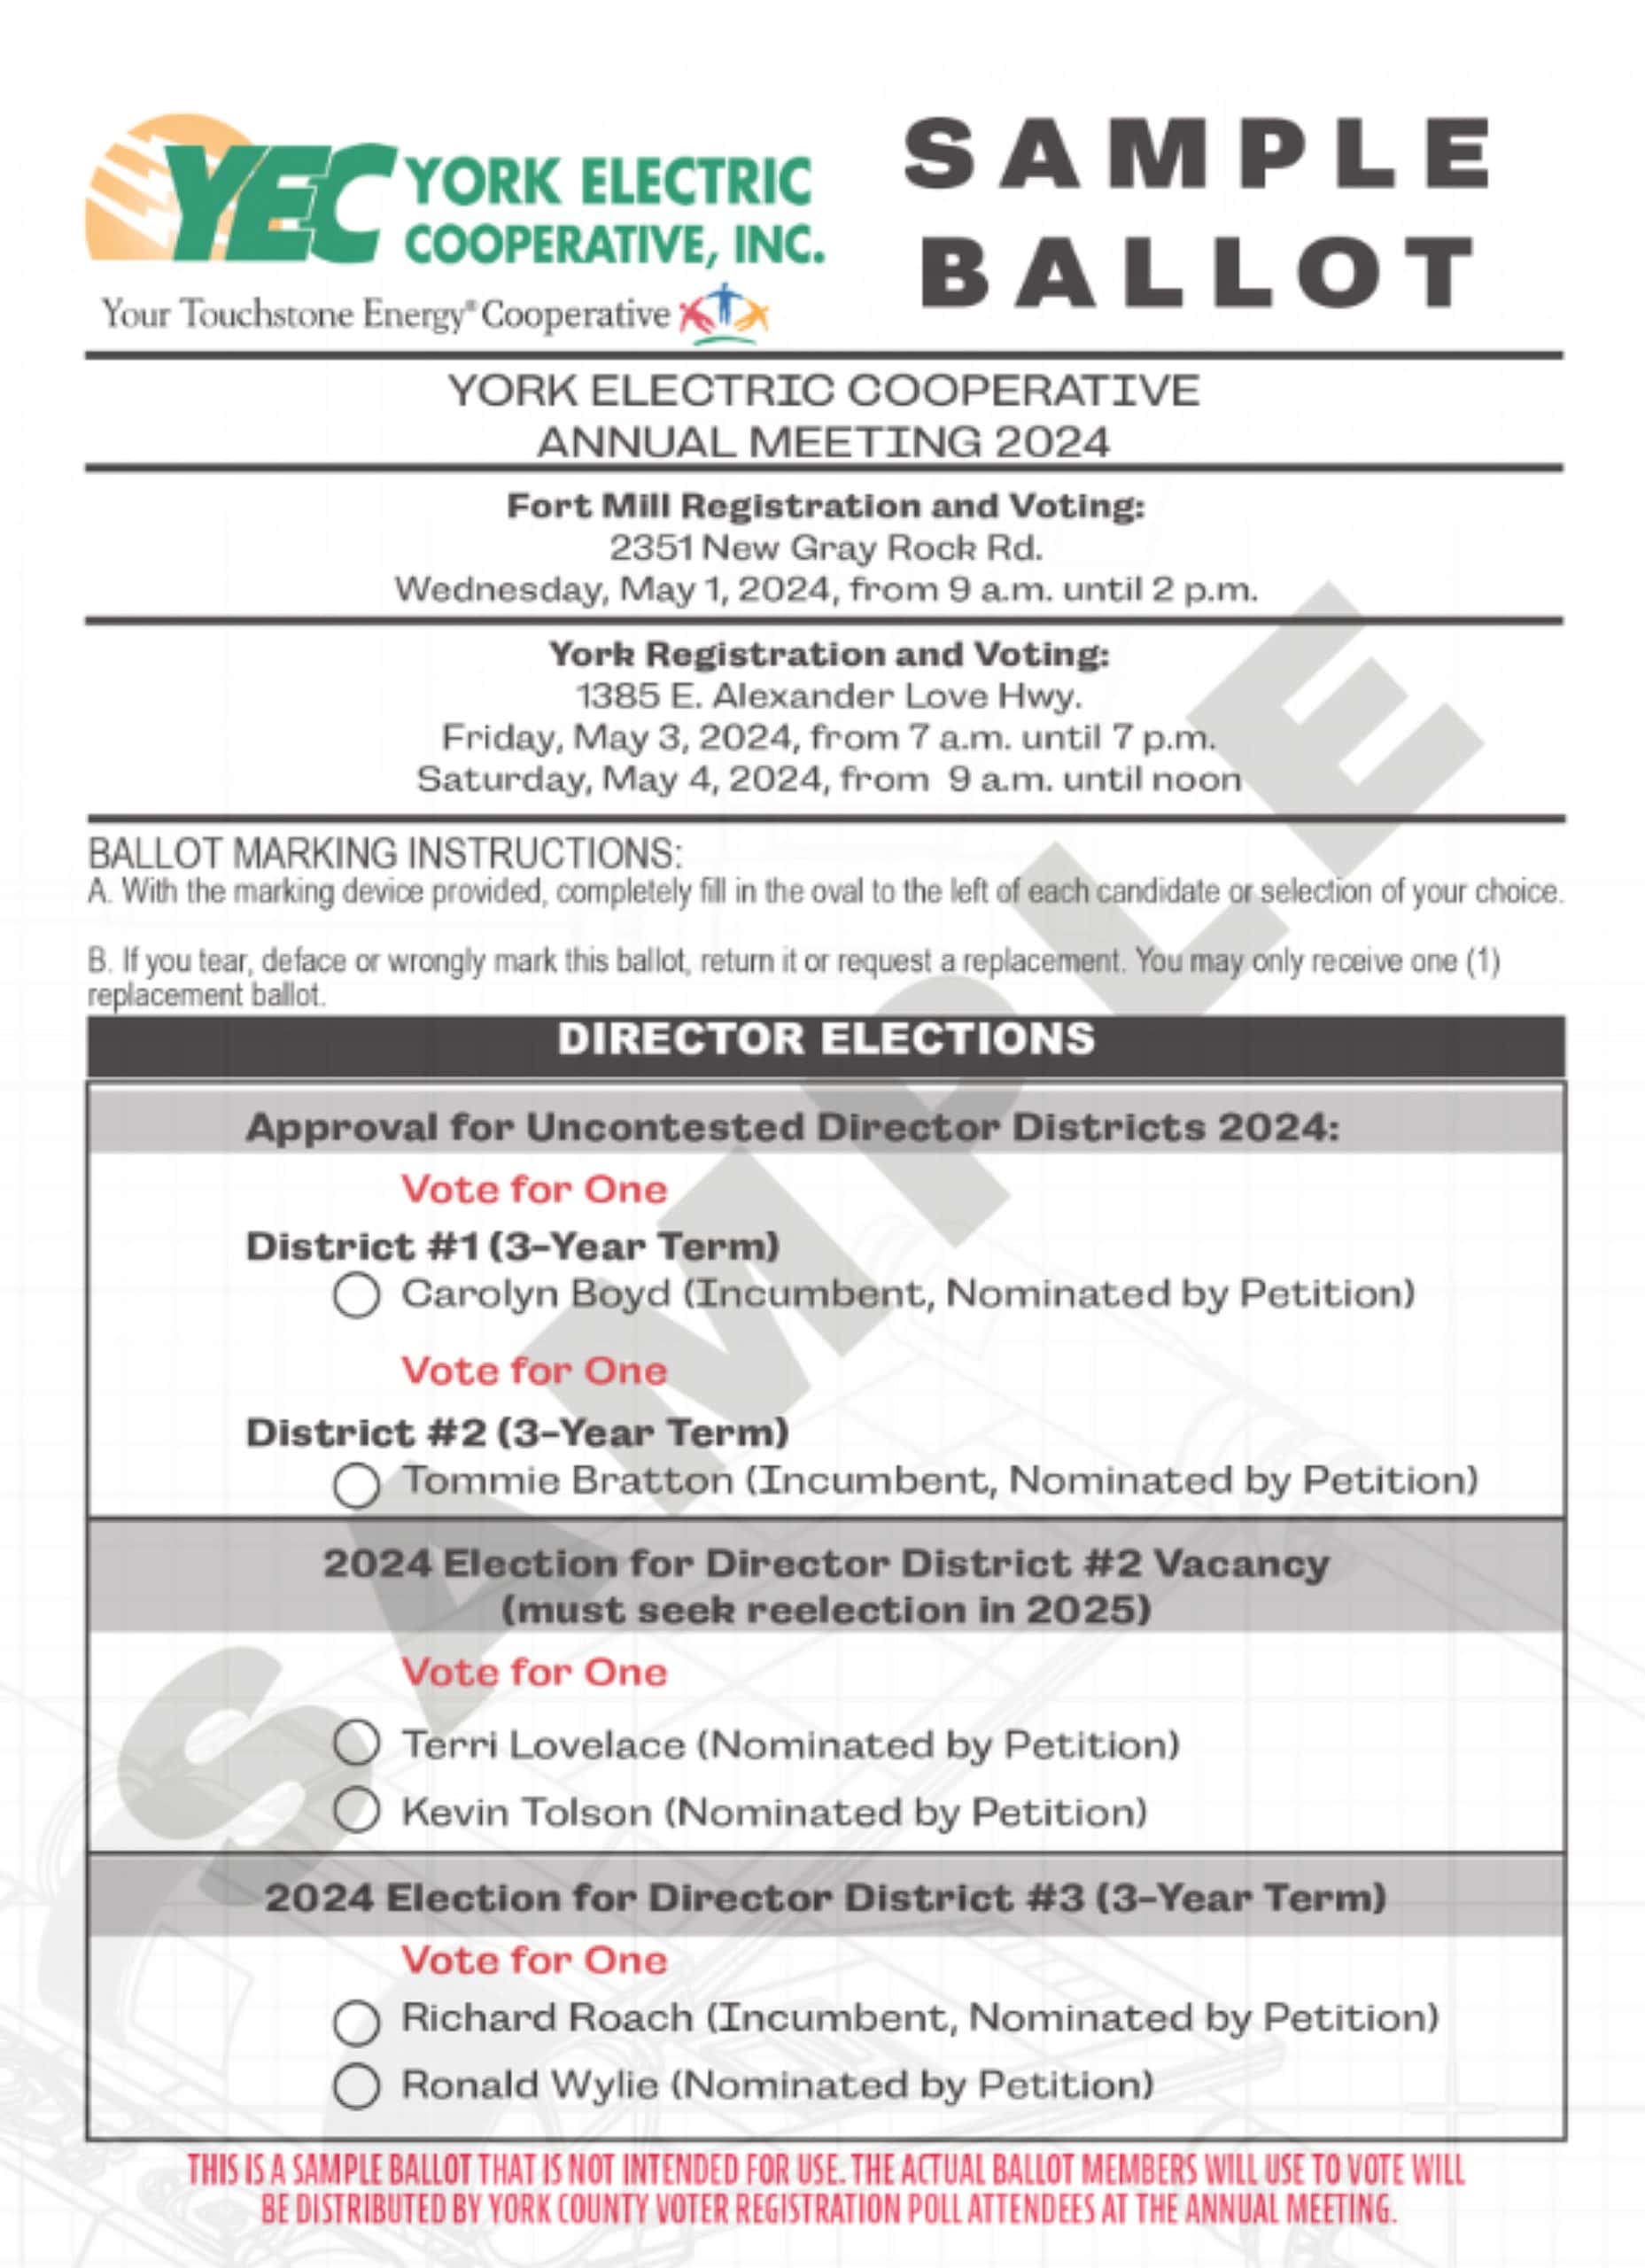 Sample ballot in graphic form